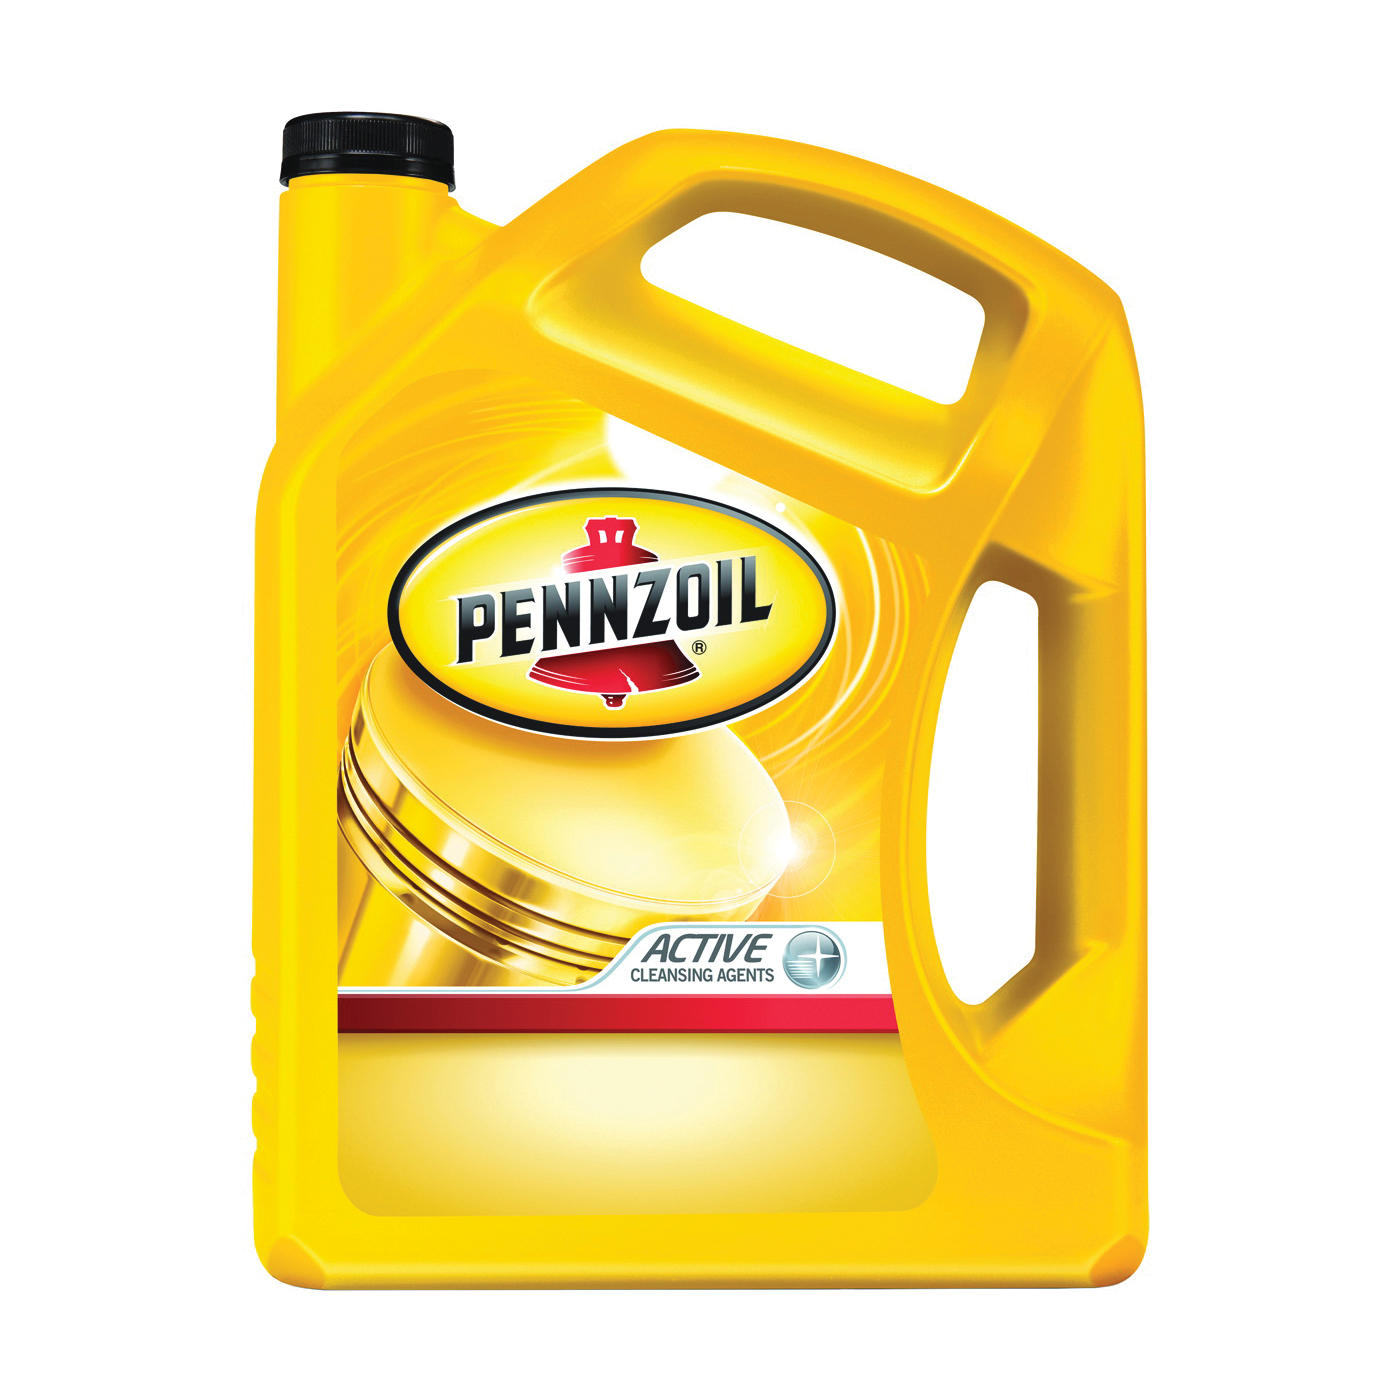 Pennzoil Car Interior Cleaning Wipes-Advanced Car Cleaning Supplies, 30-Ct,  2 PK